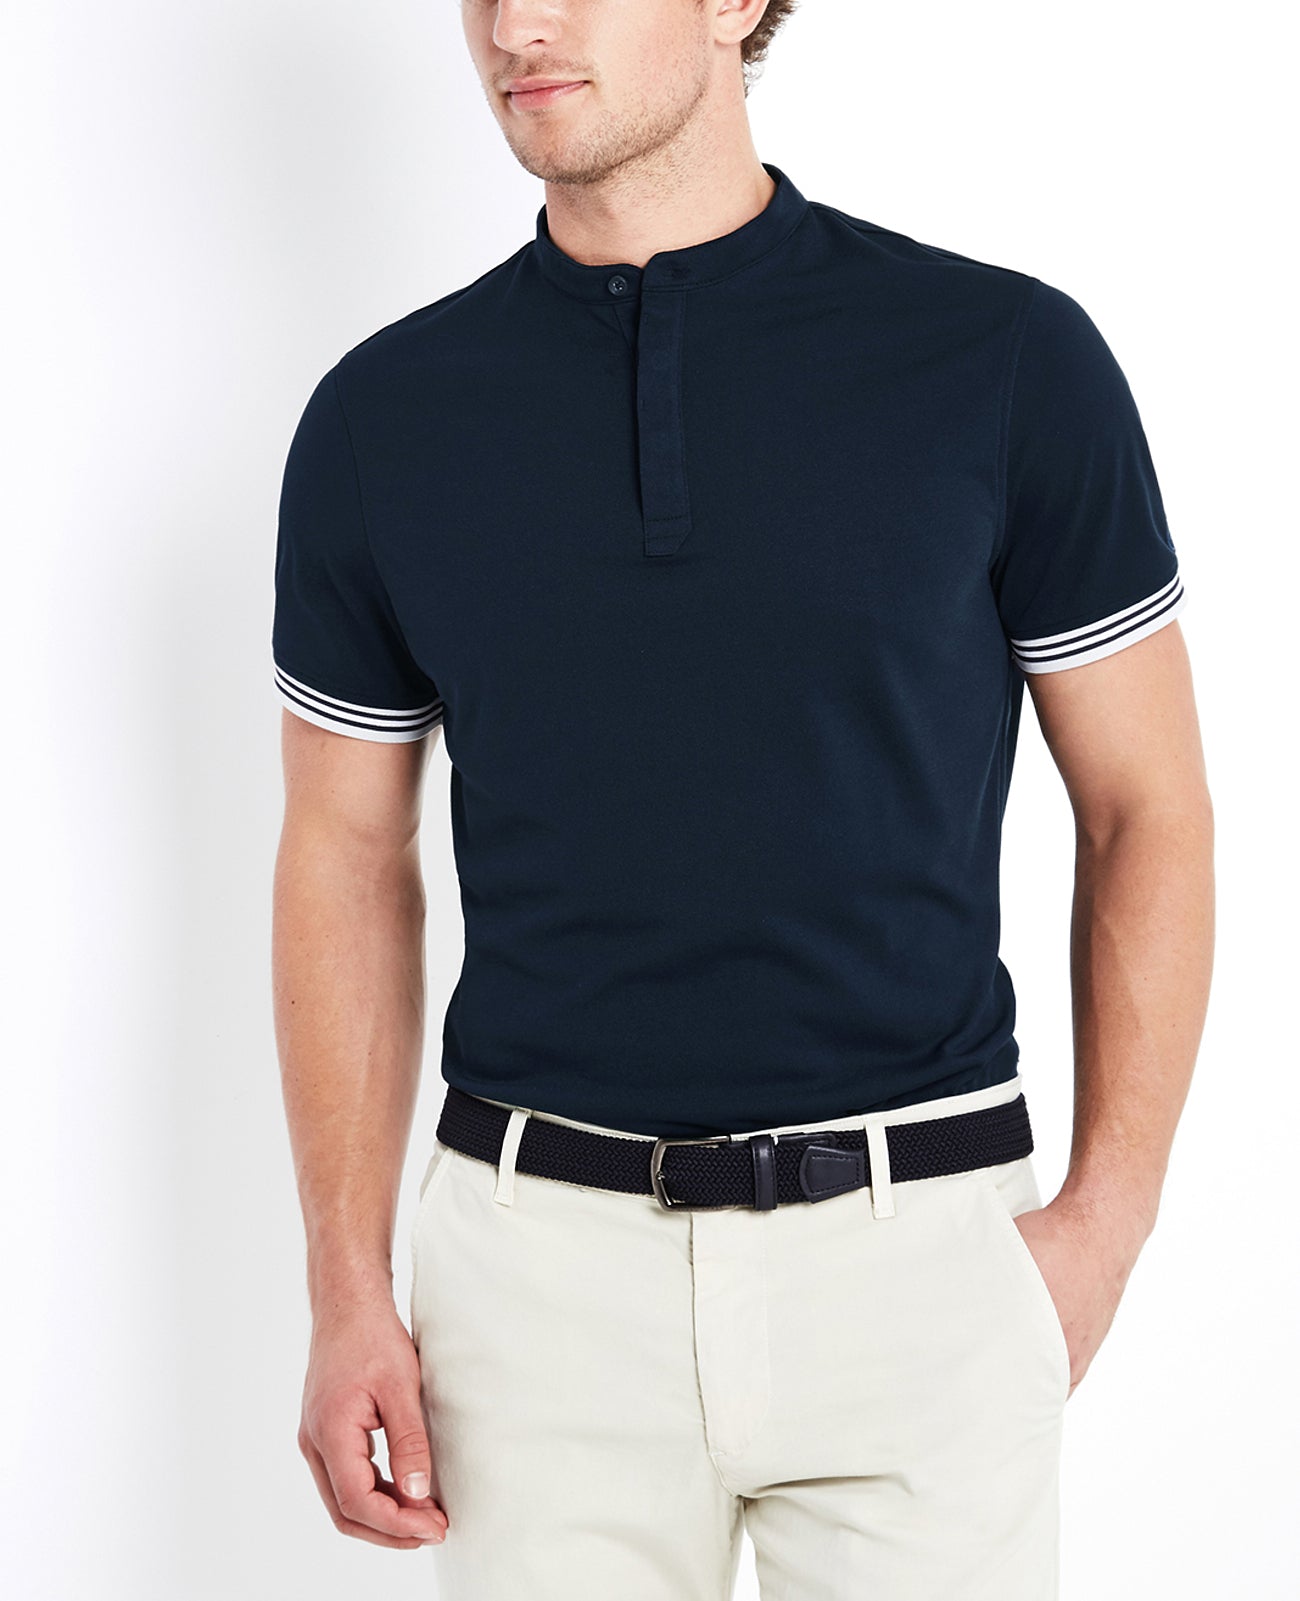 Haskett Polo Naval Blue Green Label Collection Men Tops Photo 1